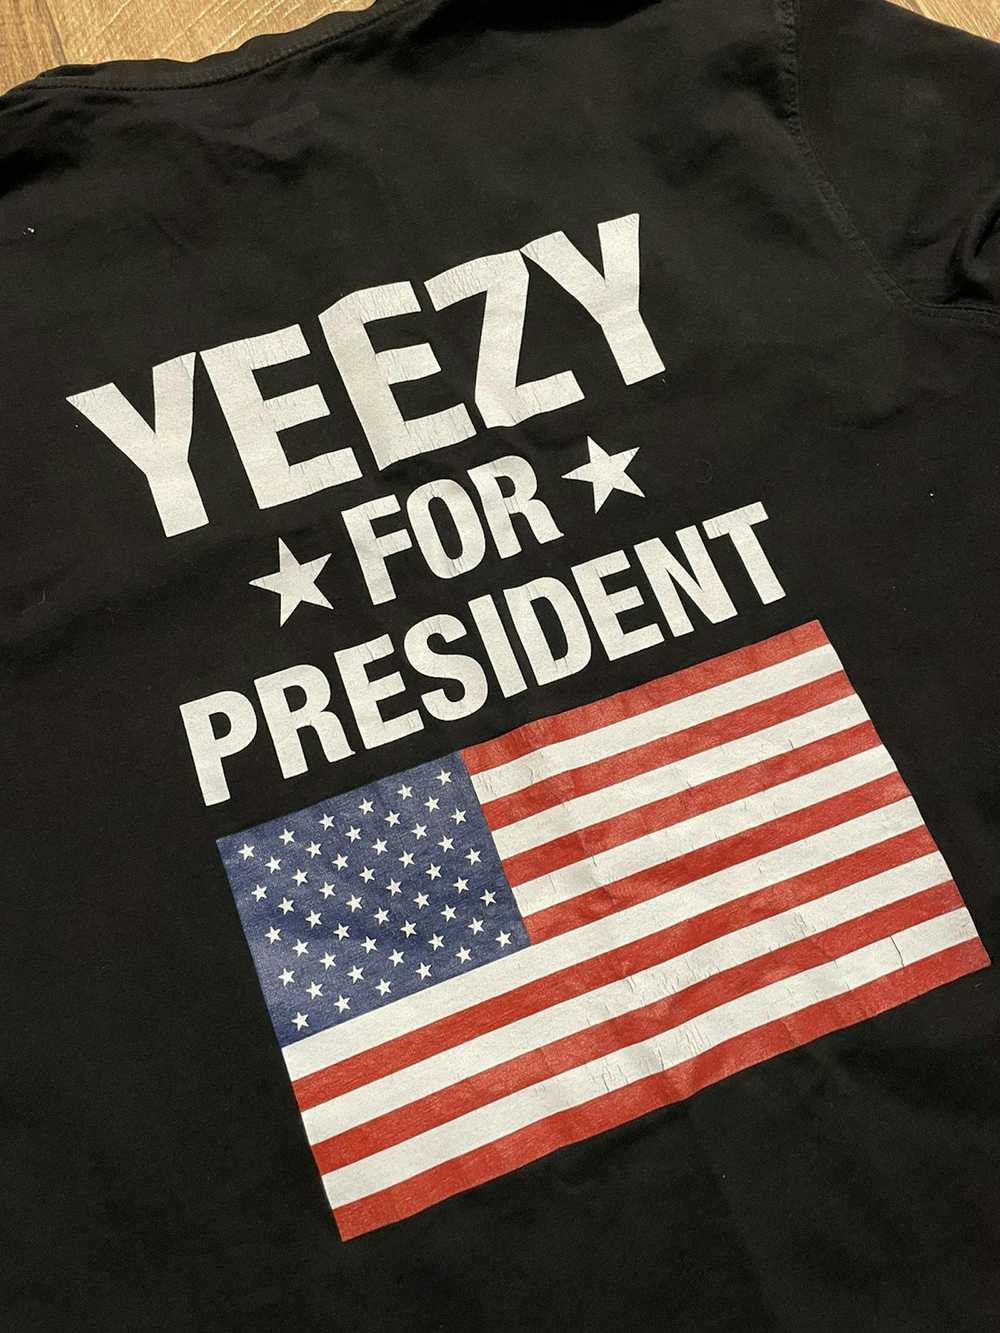 Kanye West × President's × Streetwear Yeezy For P… - image 7